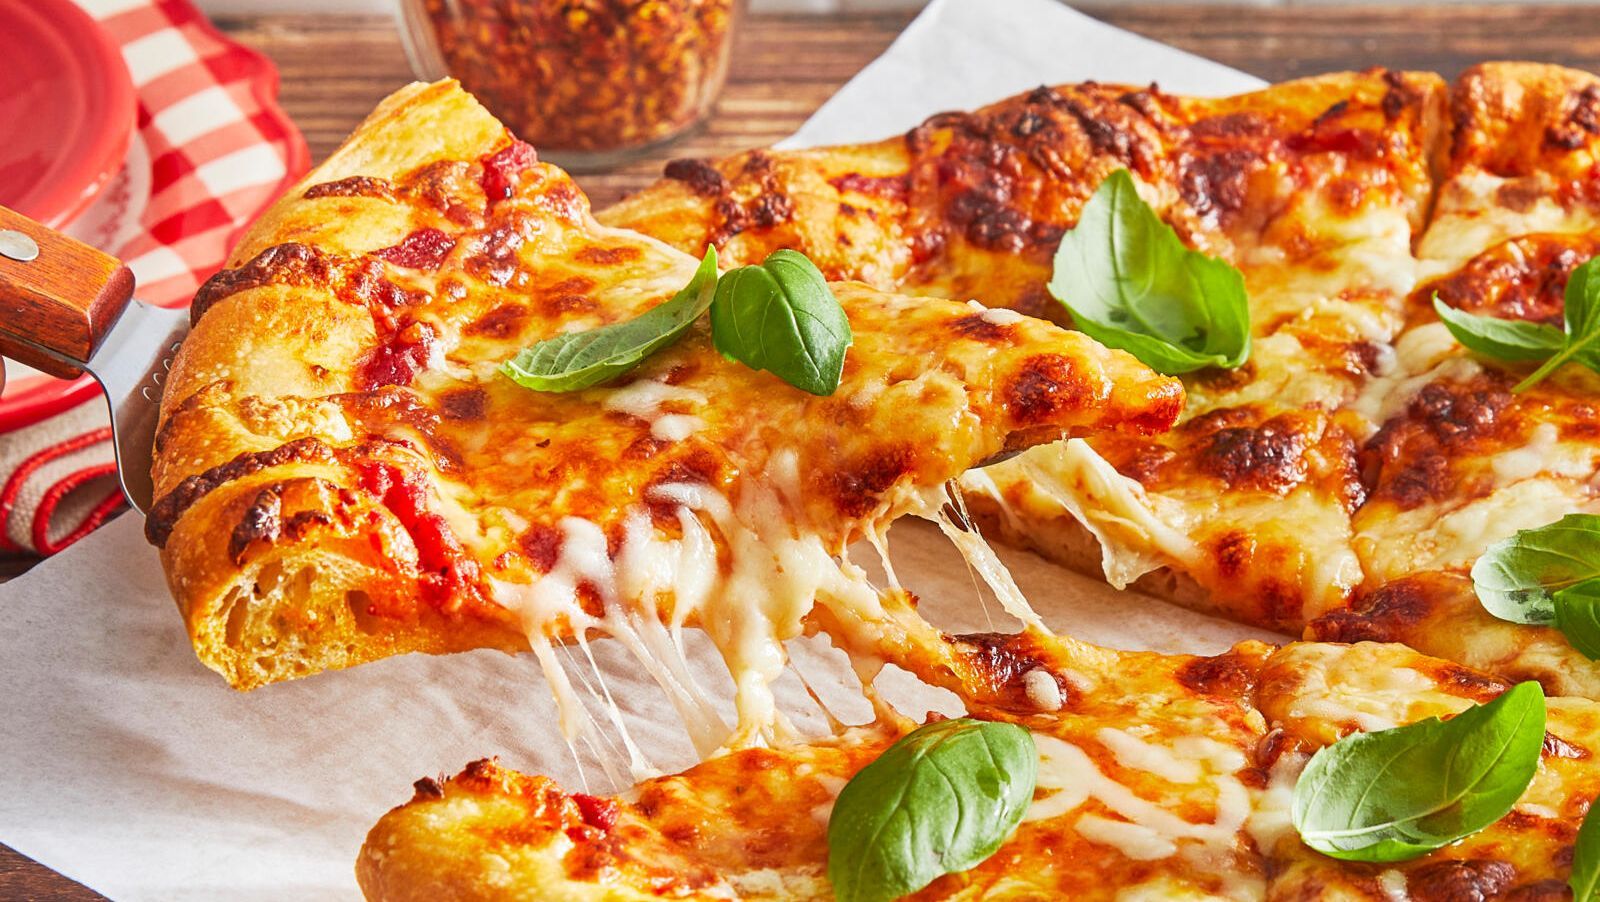 Classic Cheese Pizza Recipe - How to Make Classic Cheese Pizza